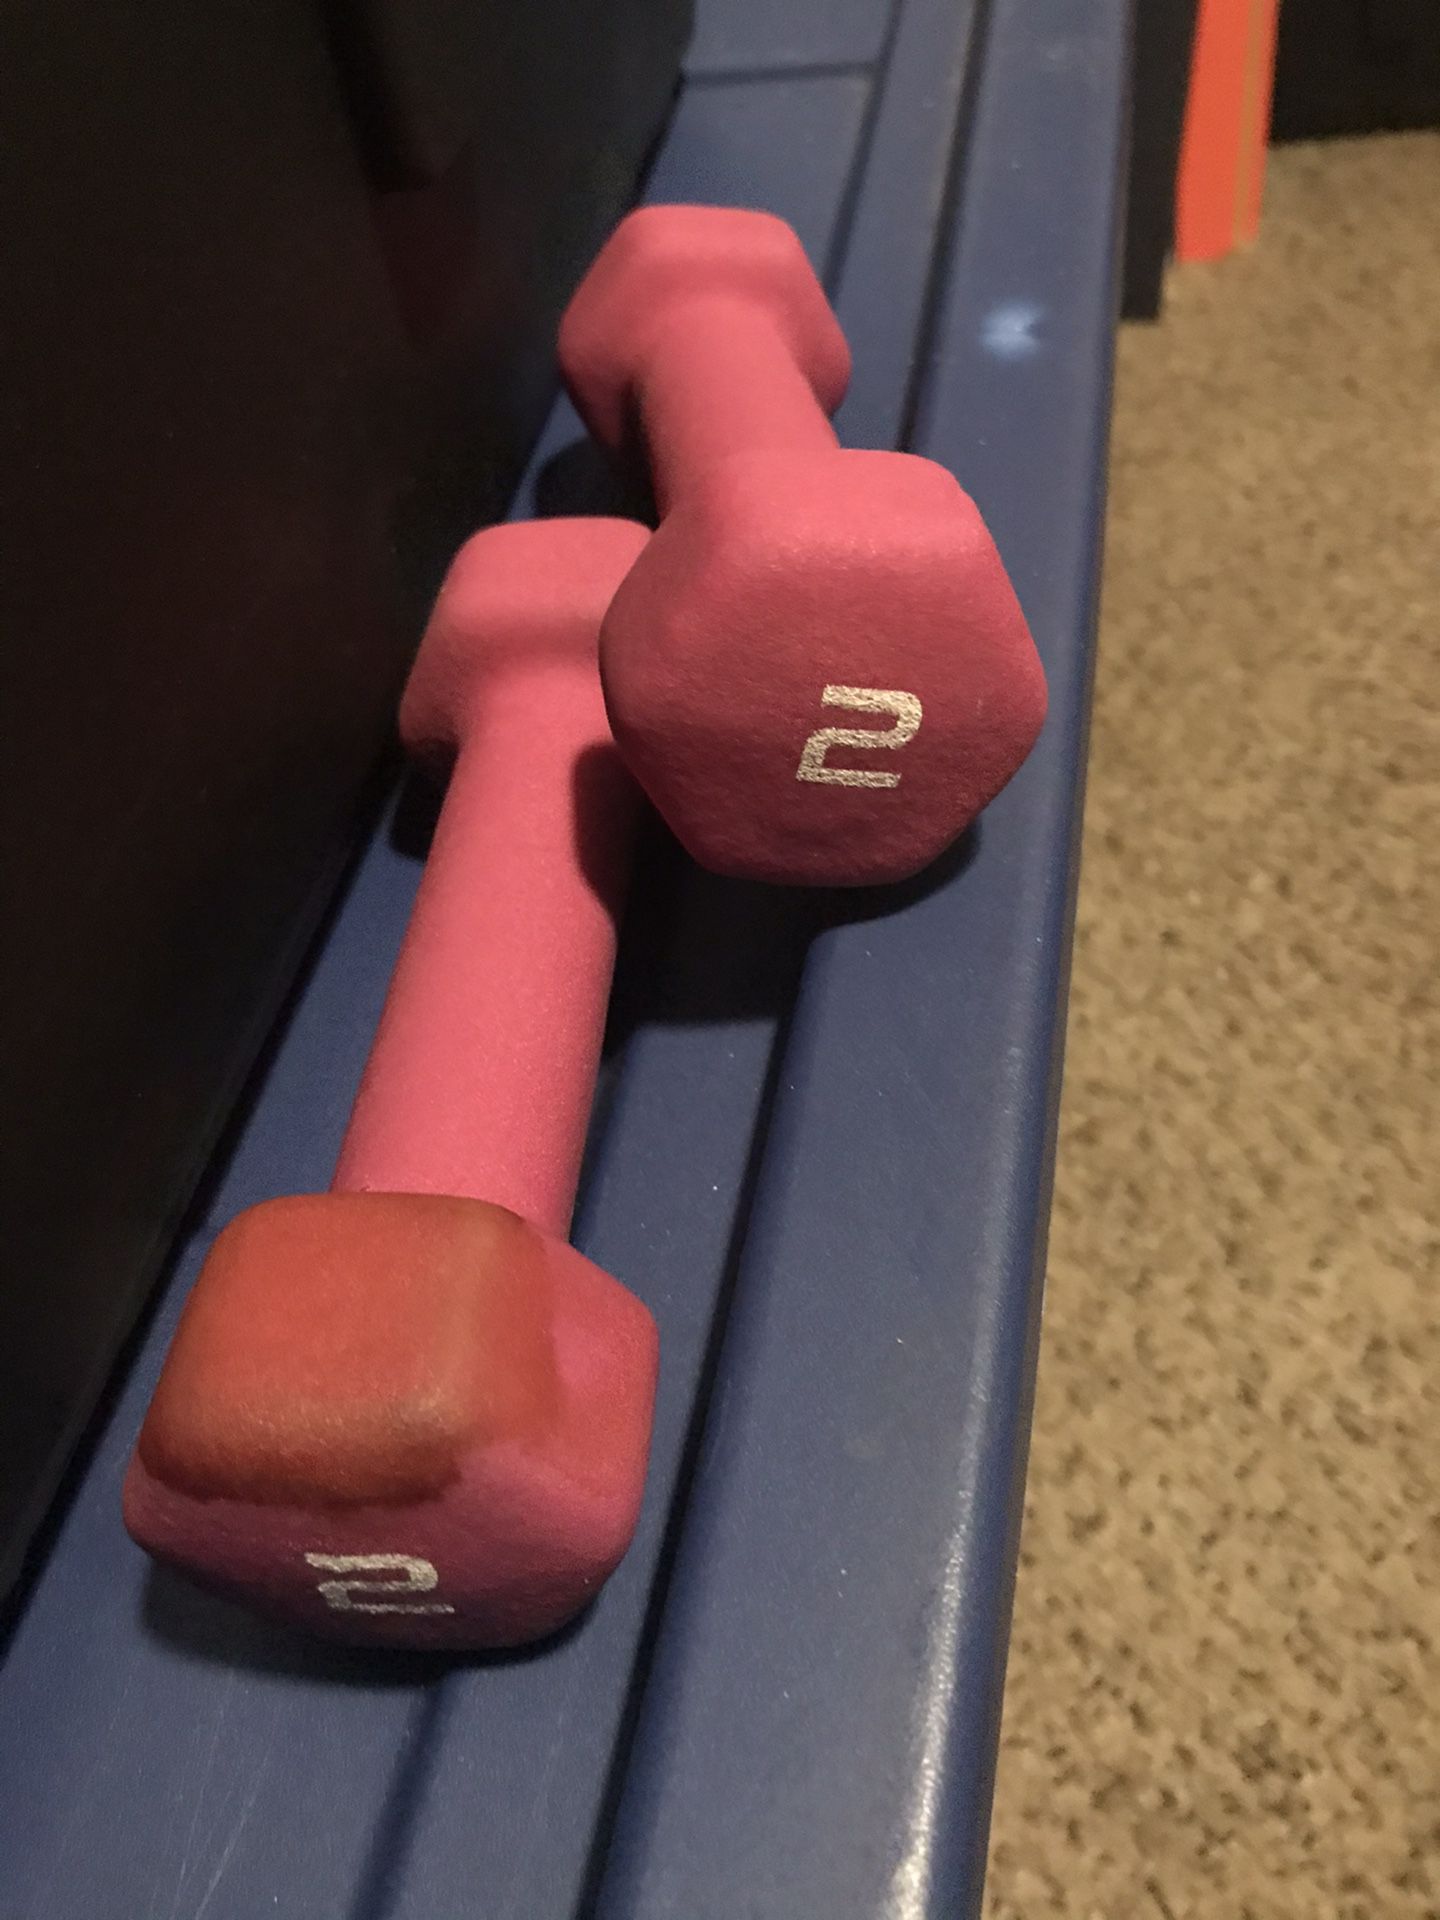 Two 2-LBS Weights